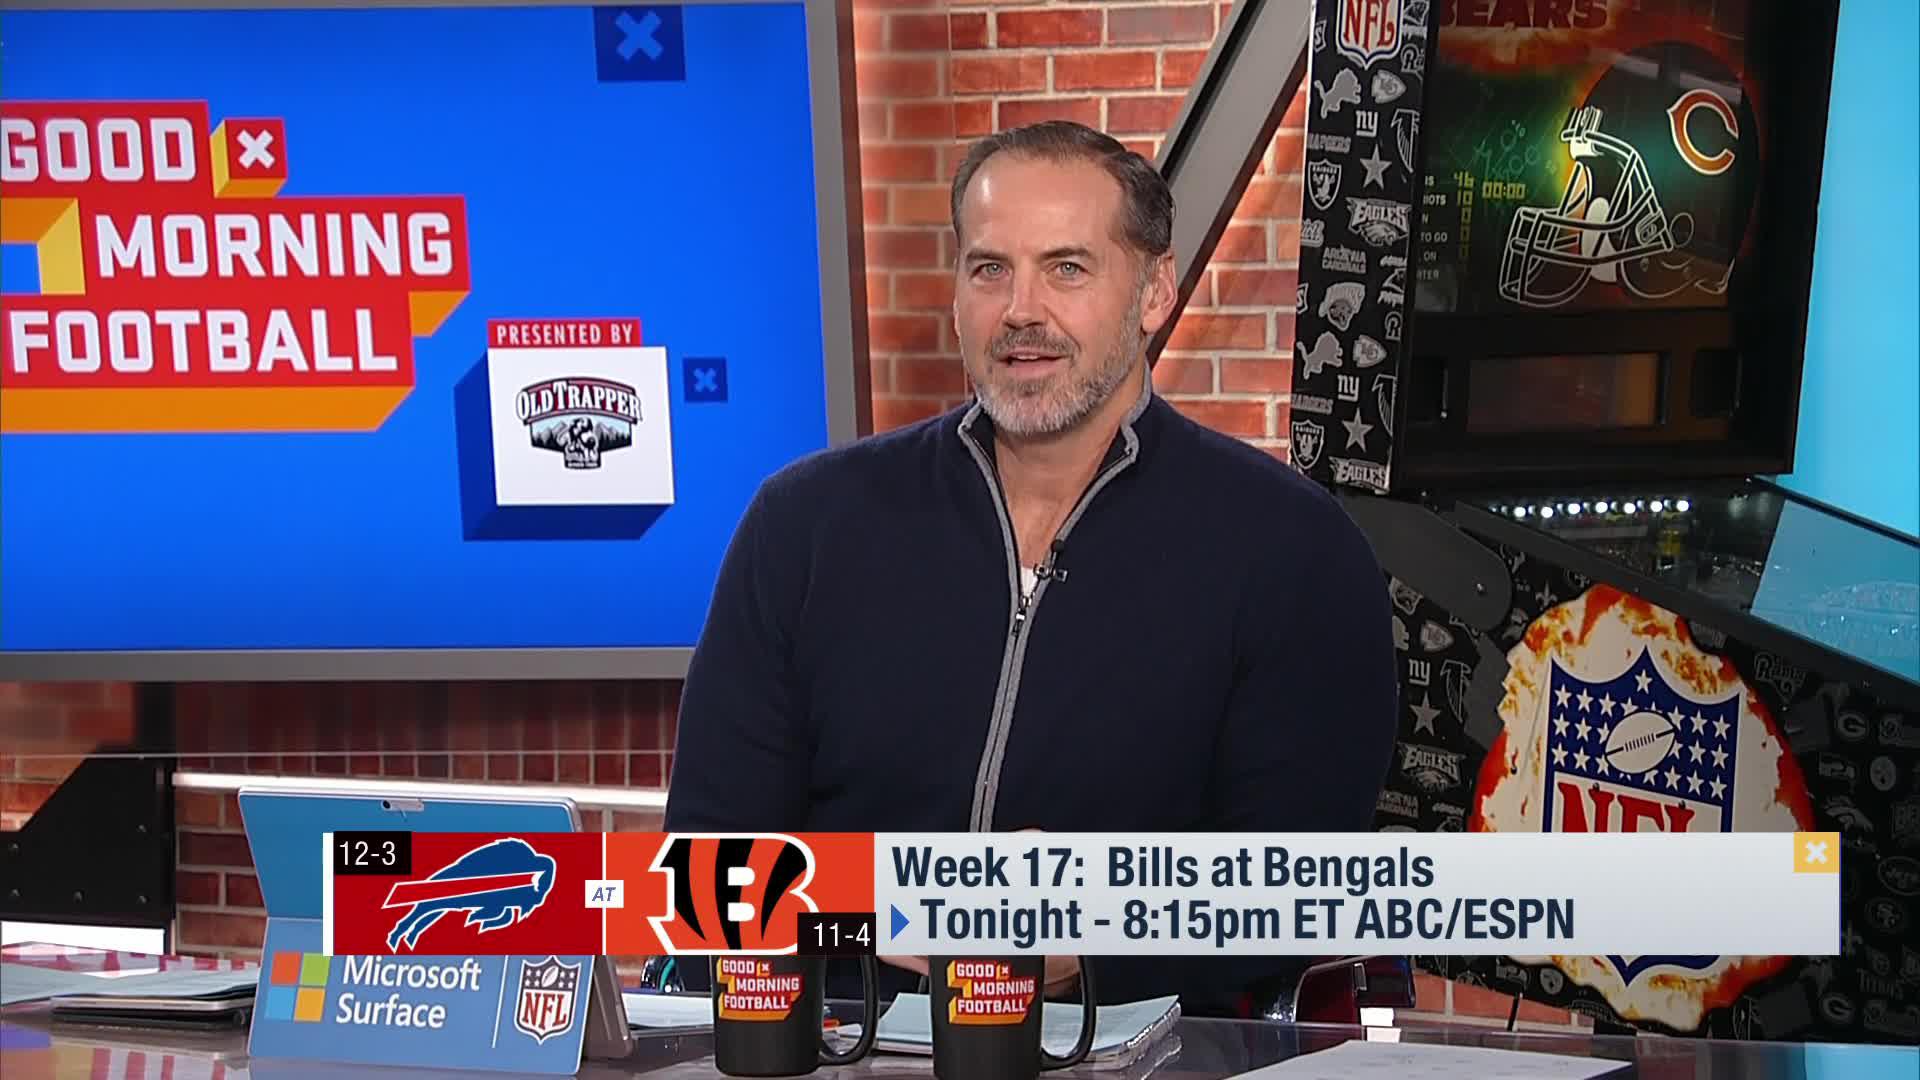 Good Morning Football on X: 'Bills at Bengals. While everyone's eyes are on  the QBs tonight, @ShaunOHara60 is looking elsewhere   / X